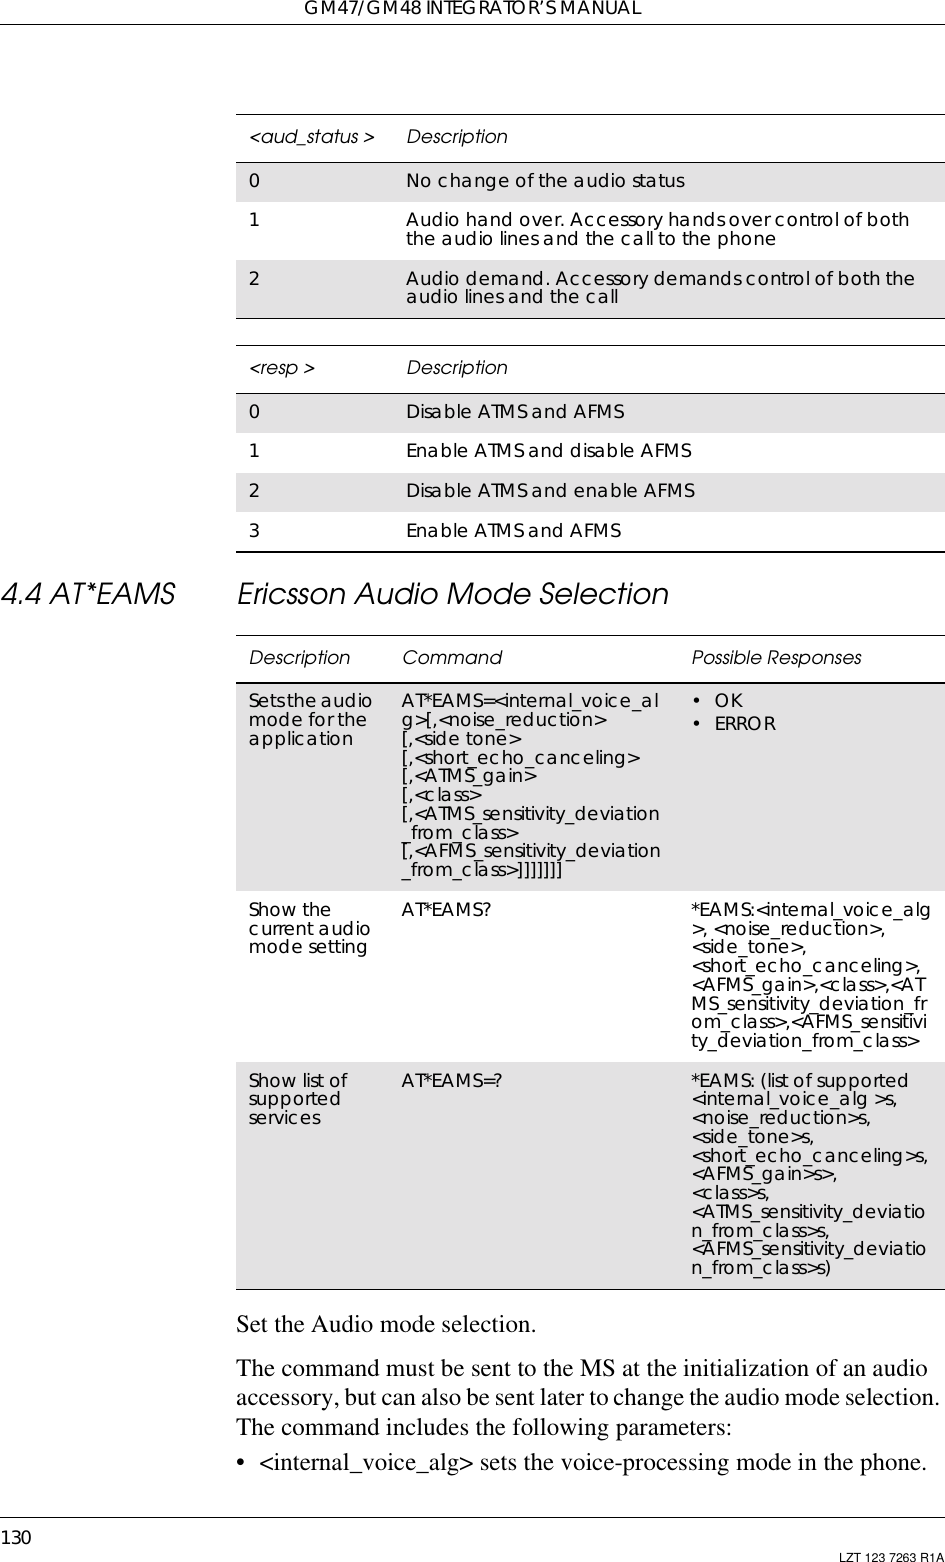 GM47/GM48 INTEGRATOR’S MANUAL130 LZT 123 7263 R1A4.4 AT*EAMS Ericsson Audio Mode SelectionSet the Audio mode selection.The command must be sent to the MS at the initialization of an audioaccessory, but can also be sent later to change the audio mode selection.The command includes the following parameters:• &lt;internal_voice_alg&gt; sets the voice-processing mode in the phone.&lt;aud_status &gt; Description0No change of the audio status1Audio hand over. Accessory hands over control of boththe audio lines and the call to the phone2Audio demand. Accessory demands control of both theaudio lines and the call&lt;resp &gt; Description0Disable ATMS and AFMS1Enable ATMS and disable AFMS2Disable ATMS and enable AFMS3Enable ATMS and AFMSDescription Command Possible ResponsesSetstheaudiomode for theapplicationAT*EAMS=&lt;internal_voice_alg&gt;[,&lt;noise_reduction&gt;[,&lt;side tone&gt;[,&lt;short_echo_canceling&gt;[,&lt;ATMS_gain&gt;[,&lt;class&gt;[,&lt;ATMS_sensitivity_deviation_from_class&gt;[,&lt;AFMS_sensitivity_deviation_from_class&gt;]]]]]]]•OK•ERRORShow thecurrent audiomode settingAT*EAMS? *EAMS:&lt;internal_voice_alg&gt;, &lt;noise_reduction&gt;,&lt;side_tone&gt;,&lt;short_echo_canceling&gt;,&lt;AFMS_gain&gt;,&lt;class&gt;,&lt;ATMS_sensitivity_deviation_from_class&gt;,&lt;AFMS_sensitivity_deviation_from_class&gt;Show list ofsupportedservicesAT*EAMS=? *EAMS: (list of supported&lt;internal_voice_alg &gt;s,&lt;noise_reduction&gt;s,&lt;side_tone&gt;s,&lt;short_echo_canceling&gt;s,&lt;AFMS_gain&gt;s&gt;,&lt;class&gt;s,&lt;ATMS_sensitivity_deviation_from_class&gt;s,&lt;AFMS_sensitivity_deviation_from_class&gt;s)